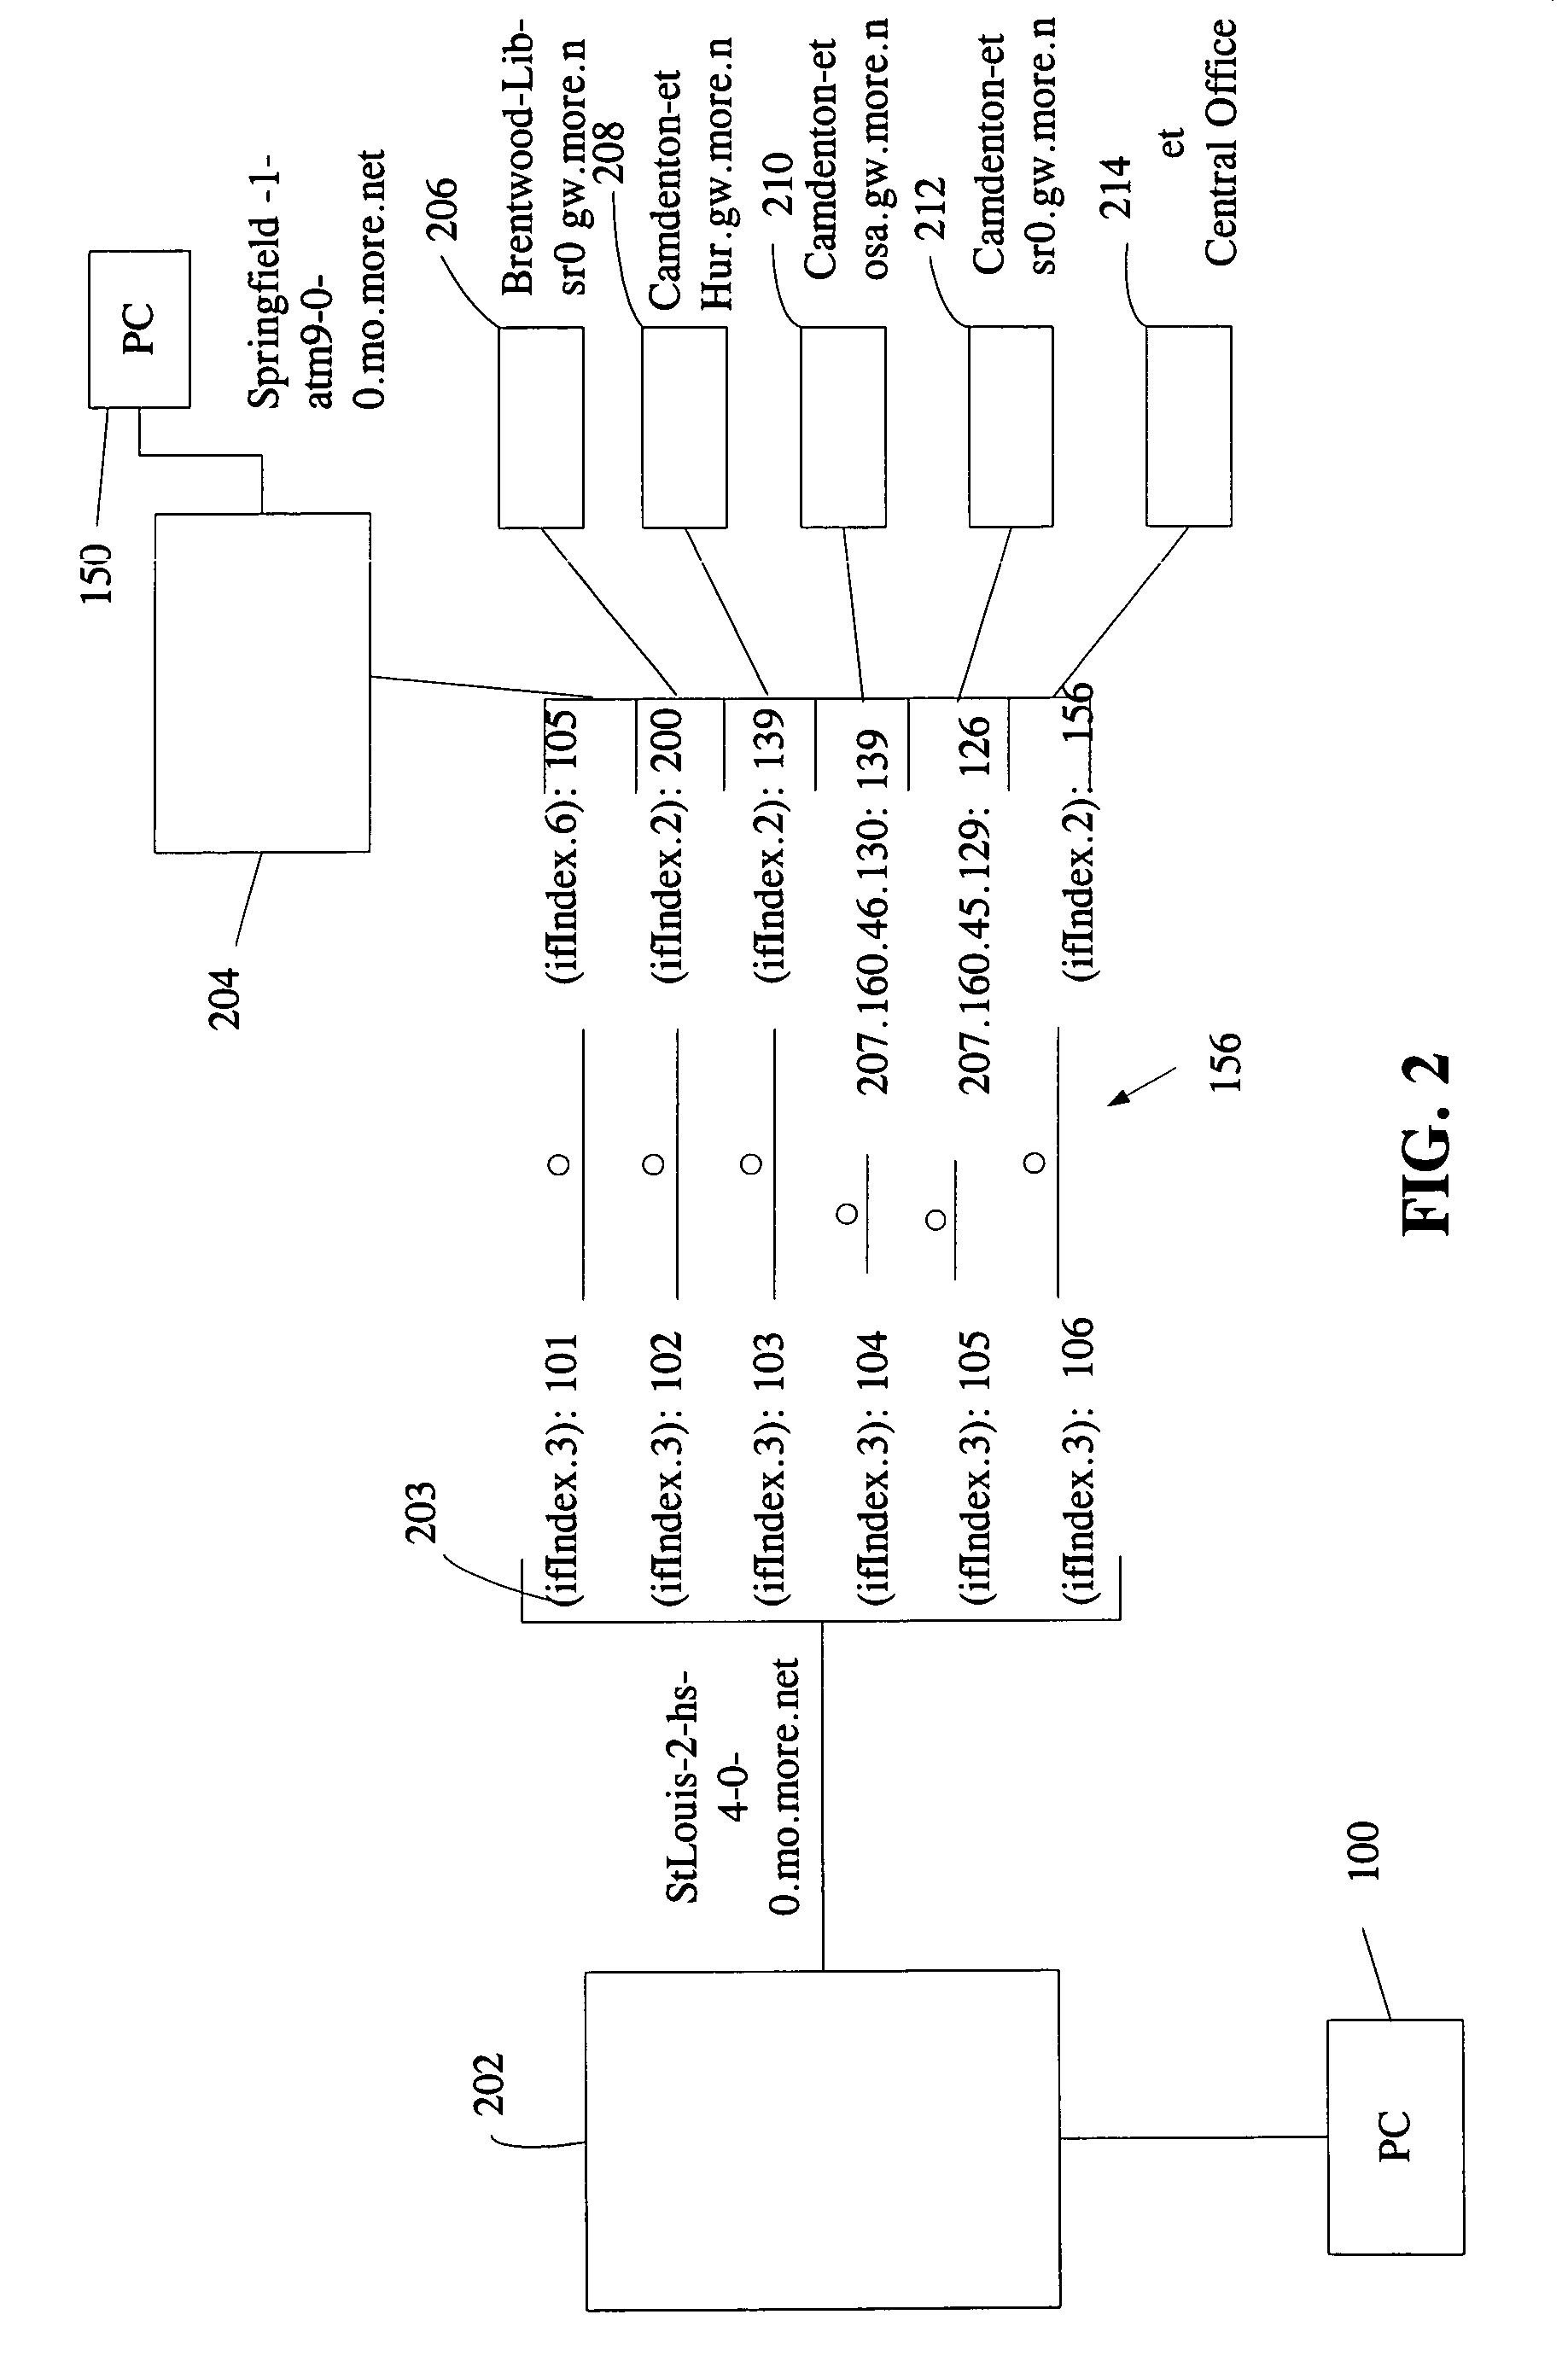 Method and apparatus for network analysis, such as analyzing and correlating identifiers of frame relay circuits in a network